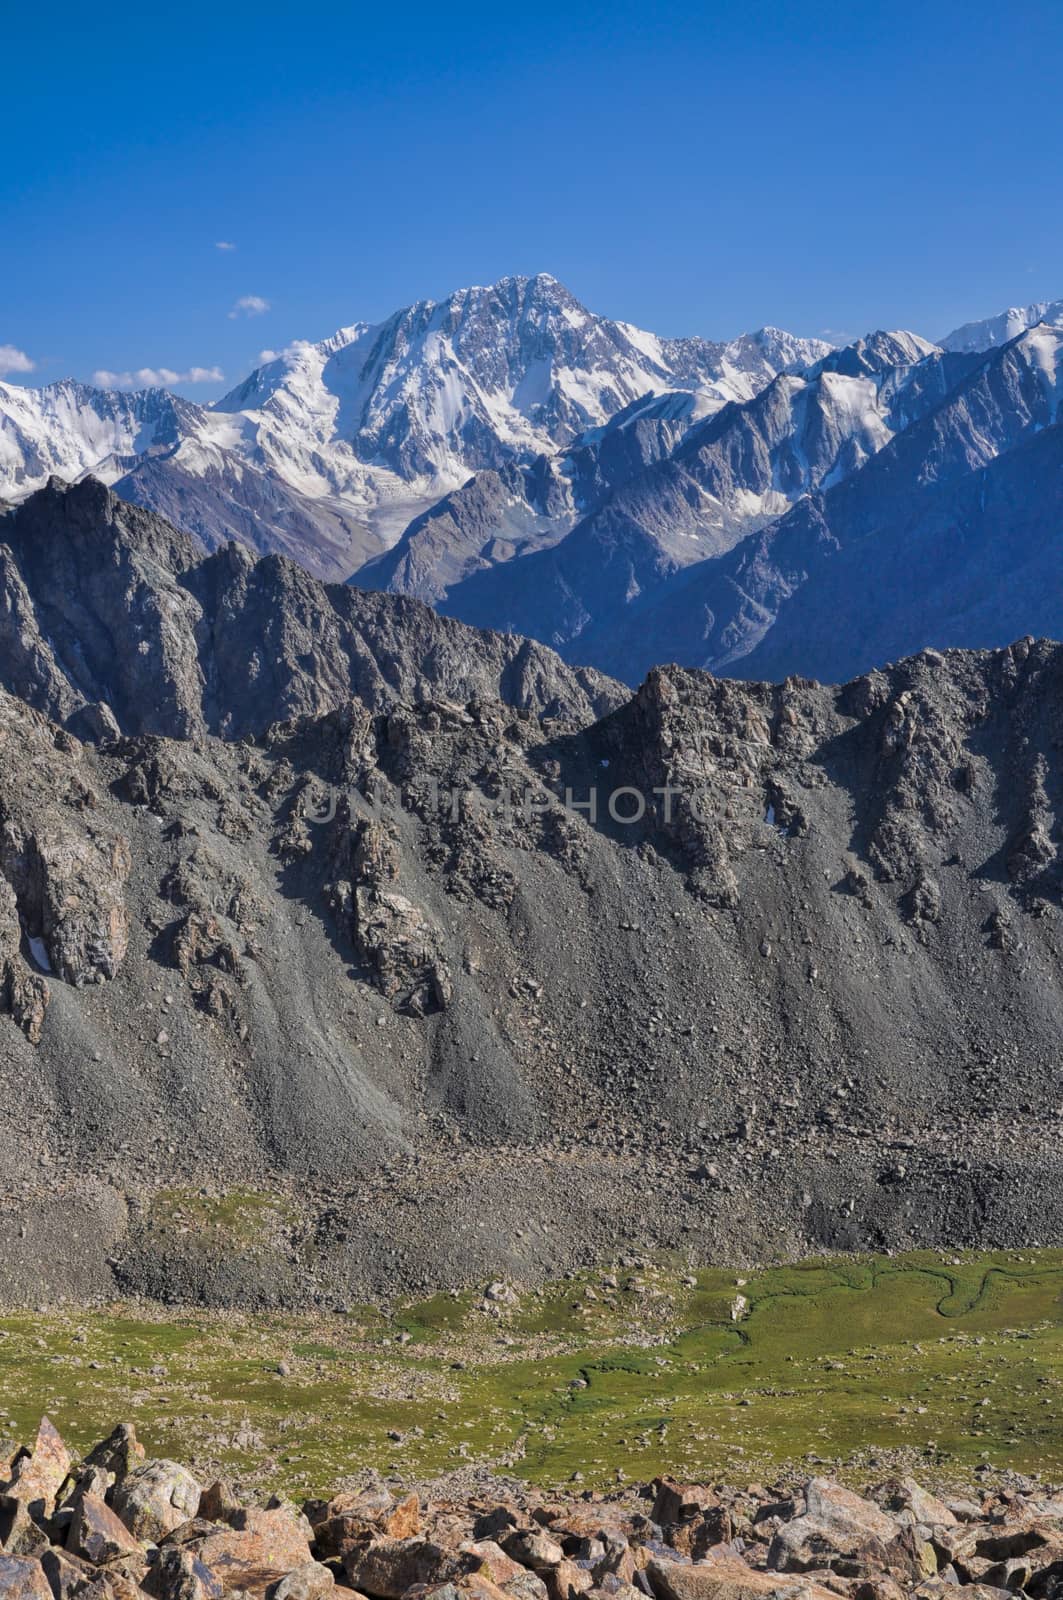 Mountains in Kyrgyzstan by MichalKnitl